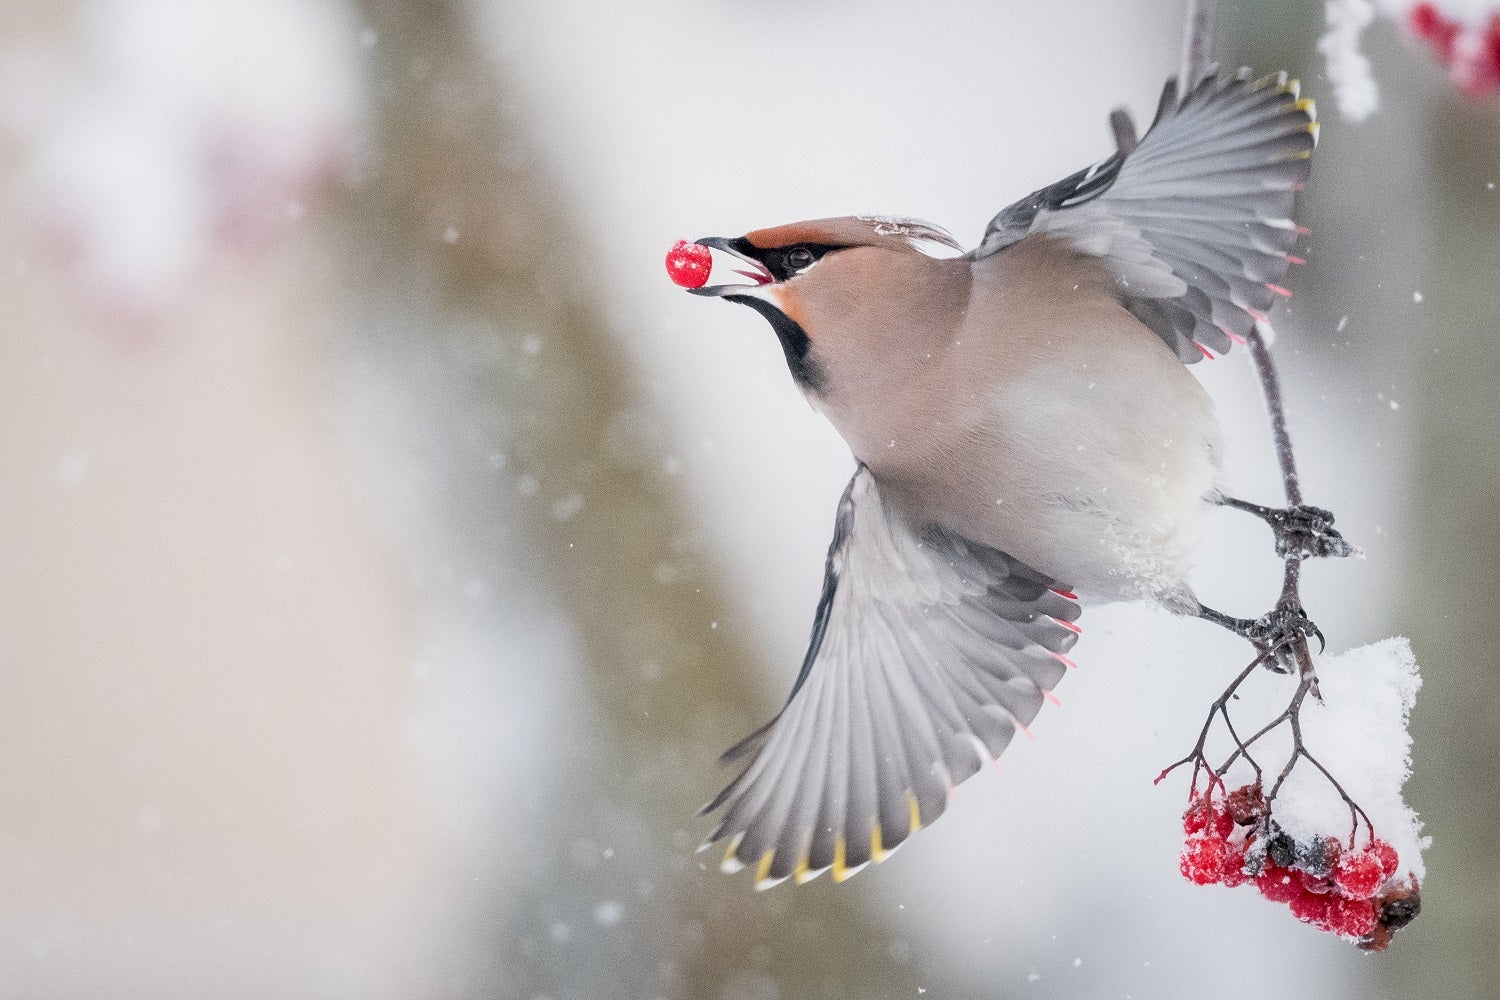 A waxwing bird taking off with a red berry in its beak with a snowy background